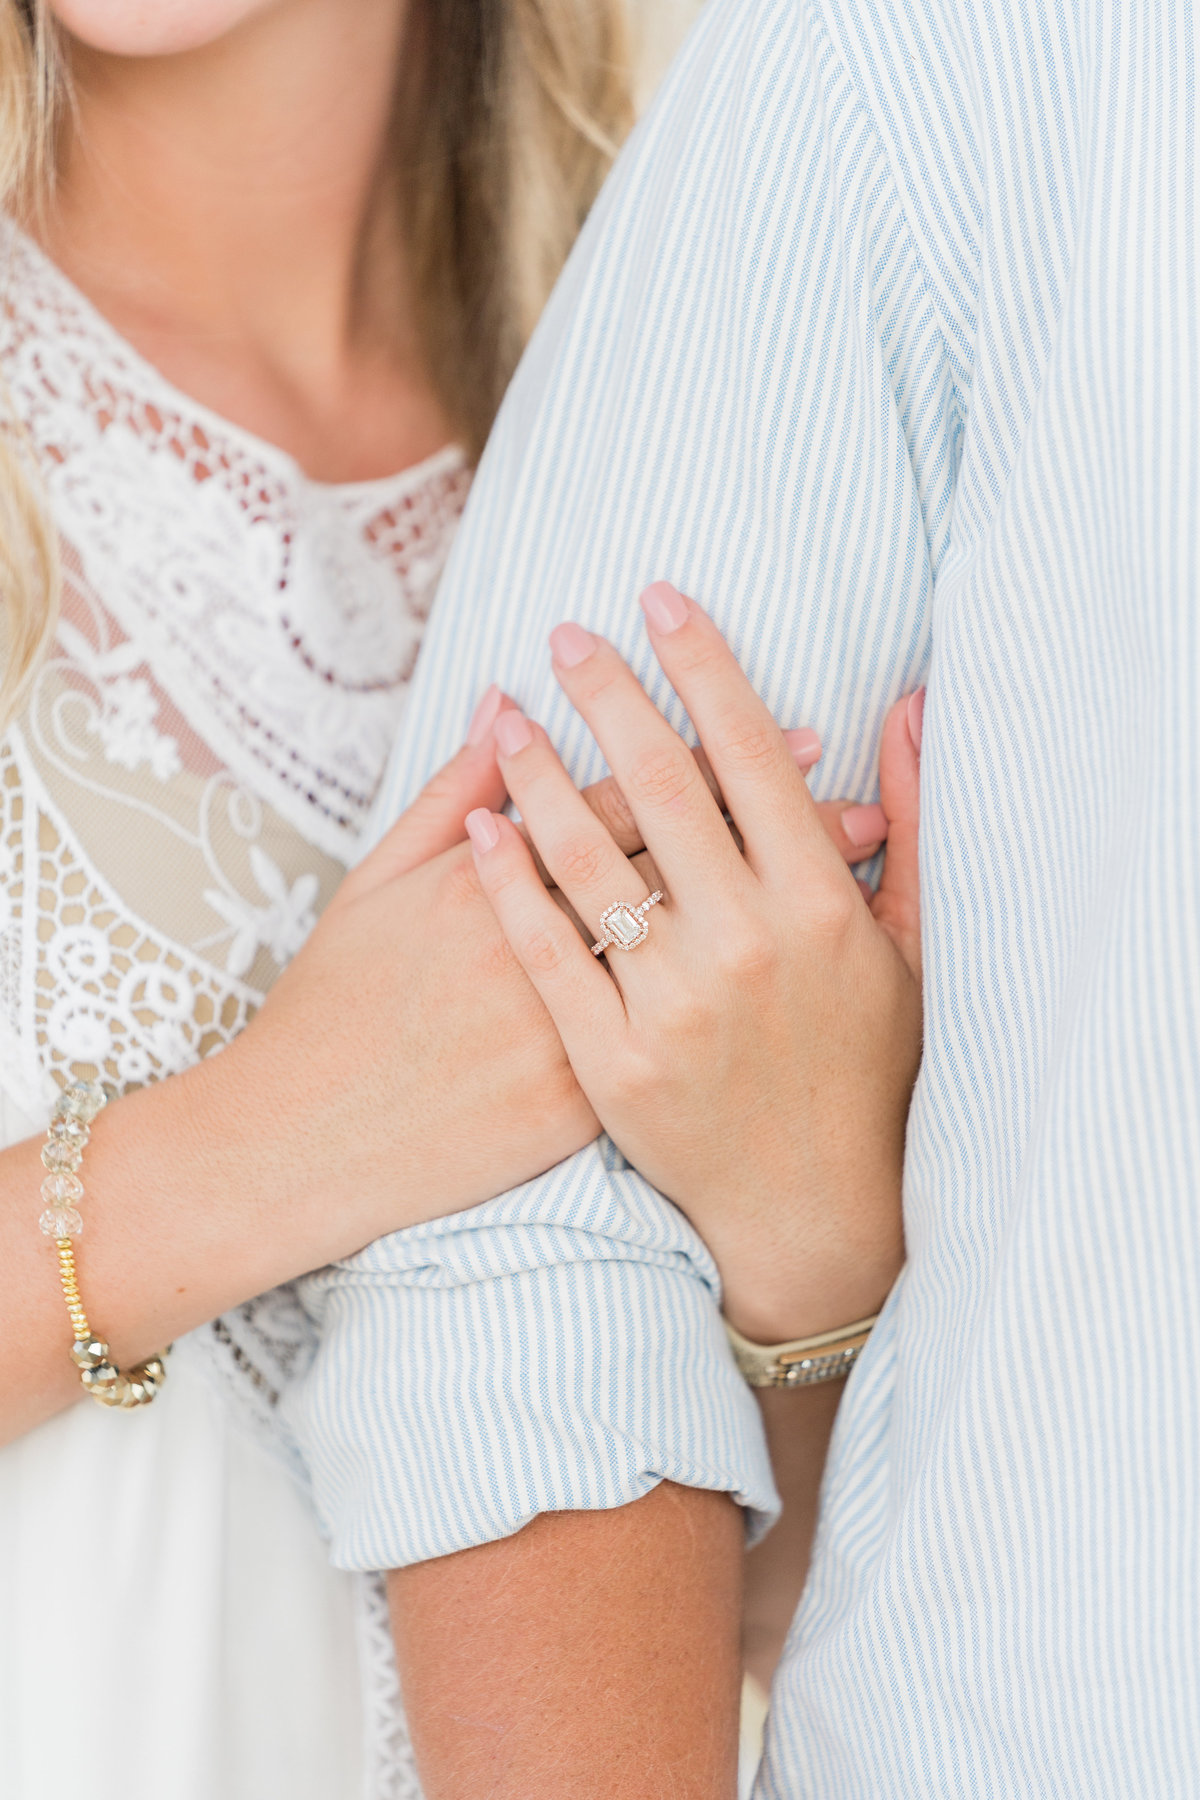 Engagement photo with woman holding man's arm